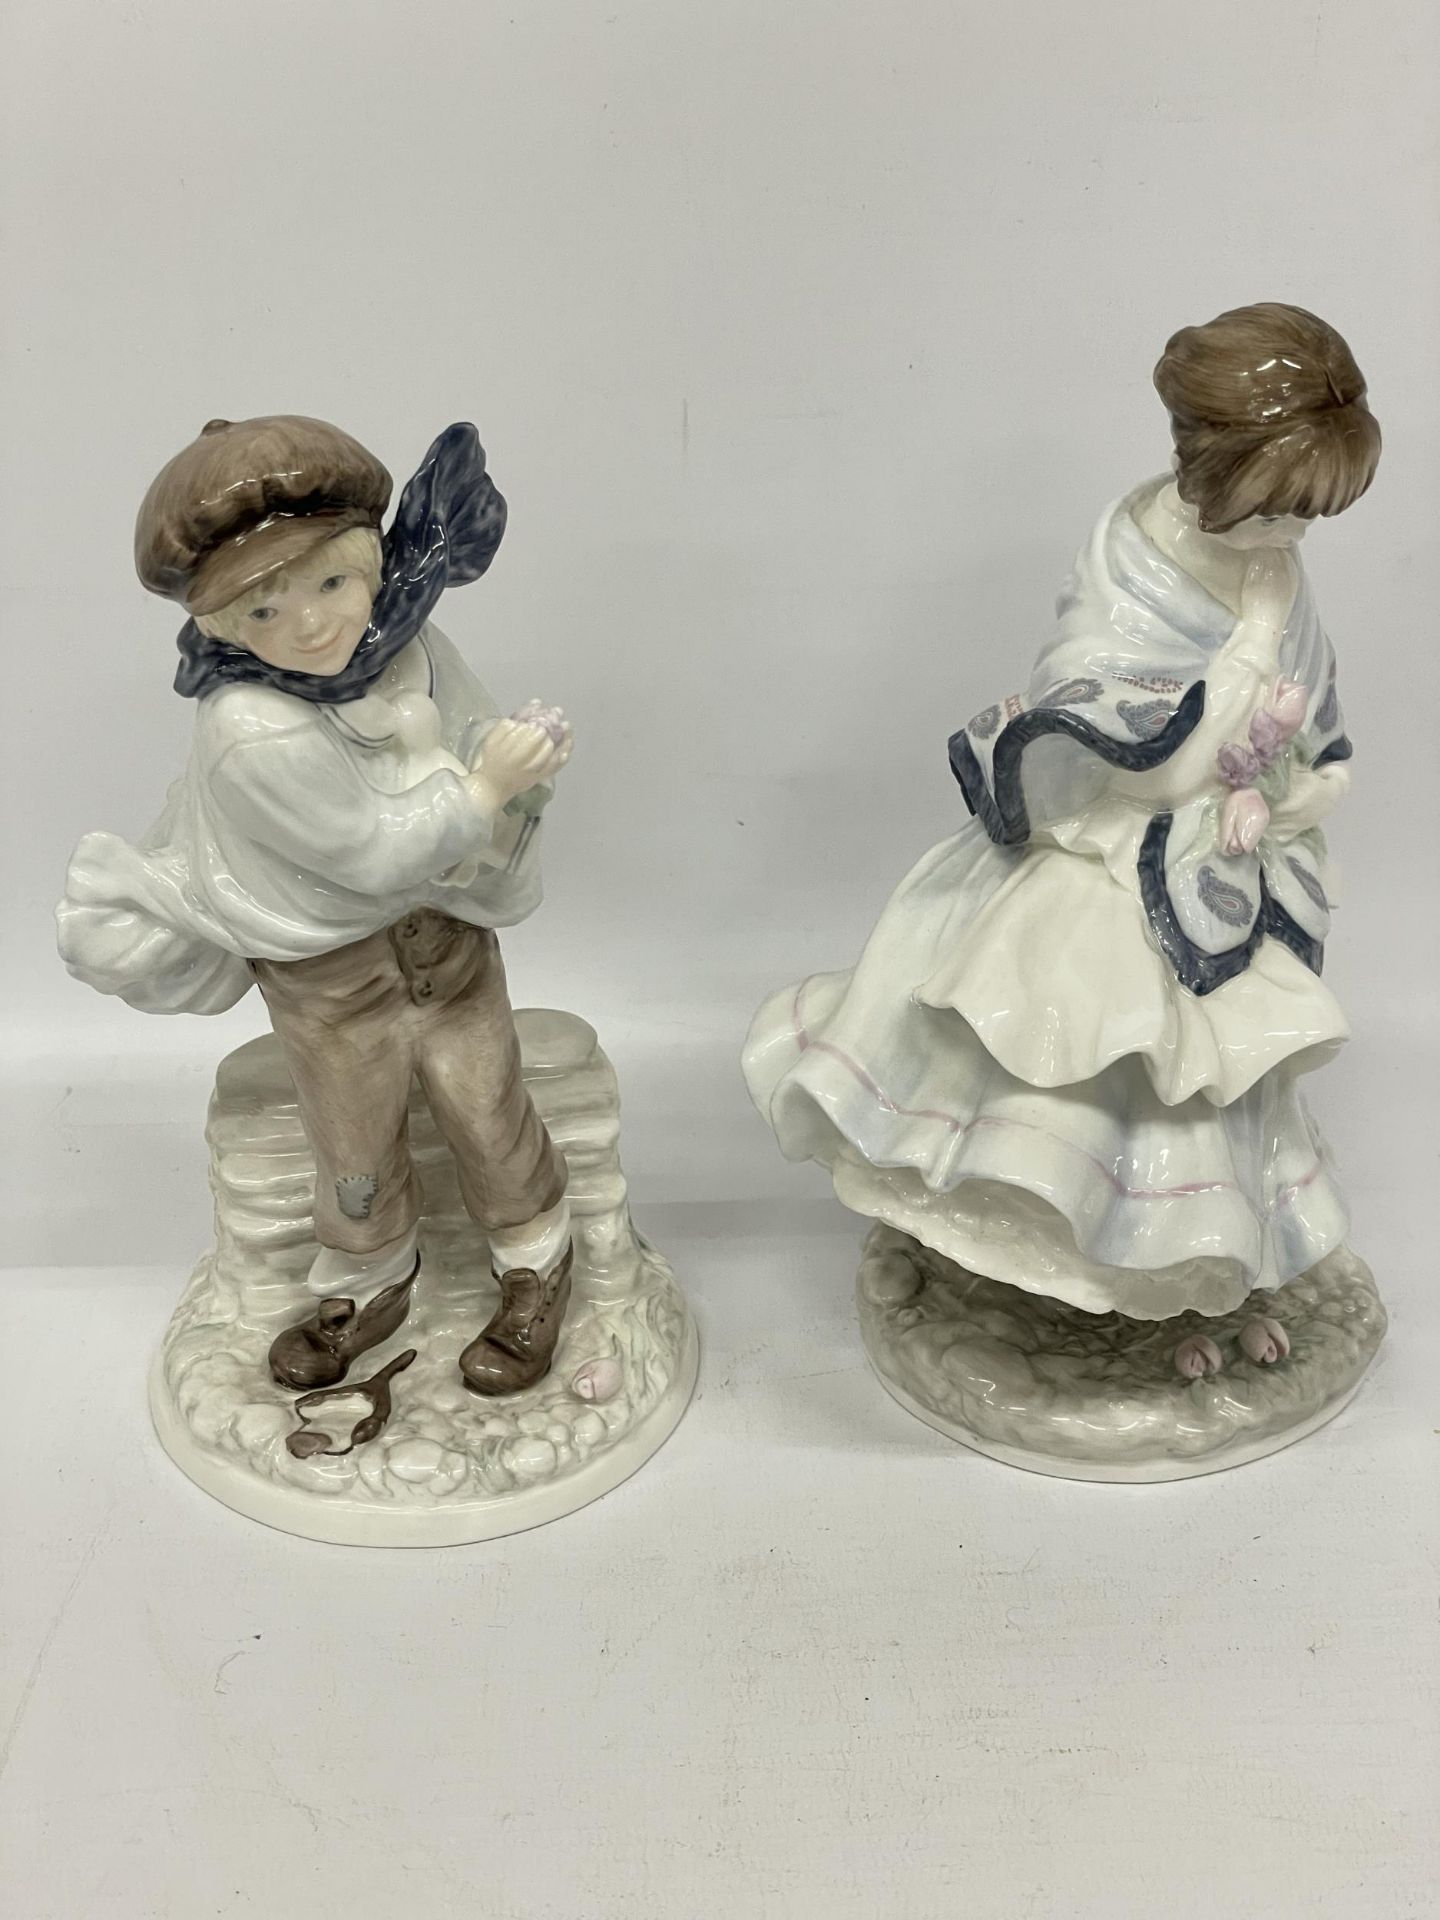 TWO LIMITED EDITION COALPORT FIGURES - 'THE BOY' AND 'VISITING DAY'